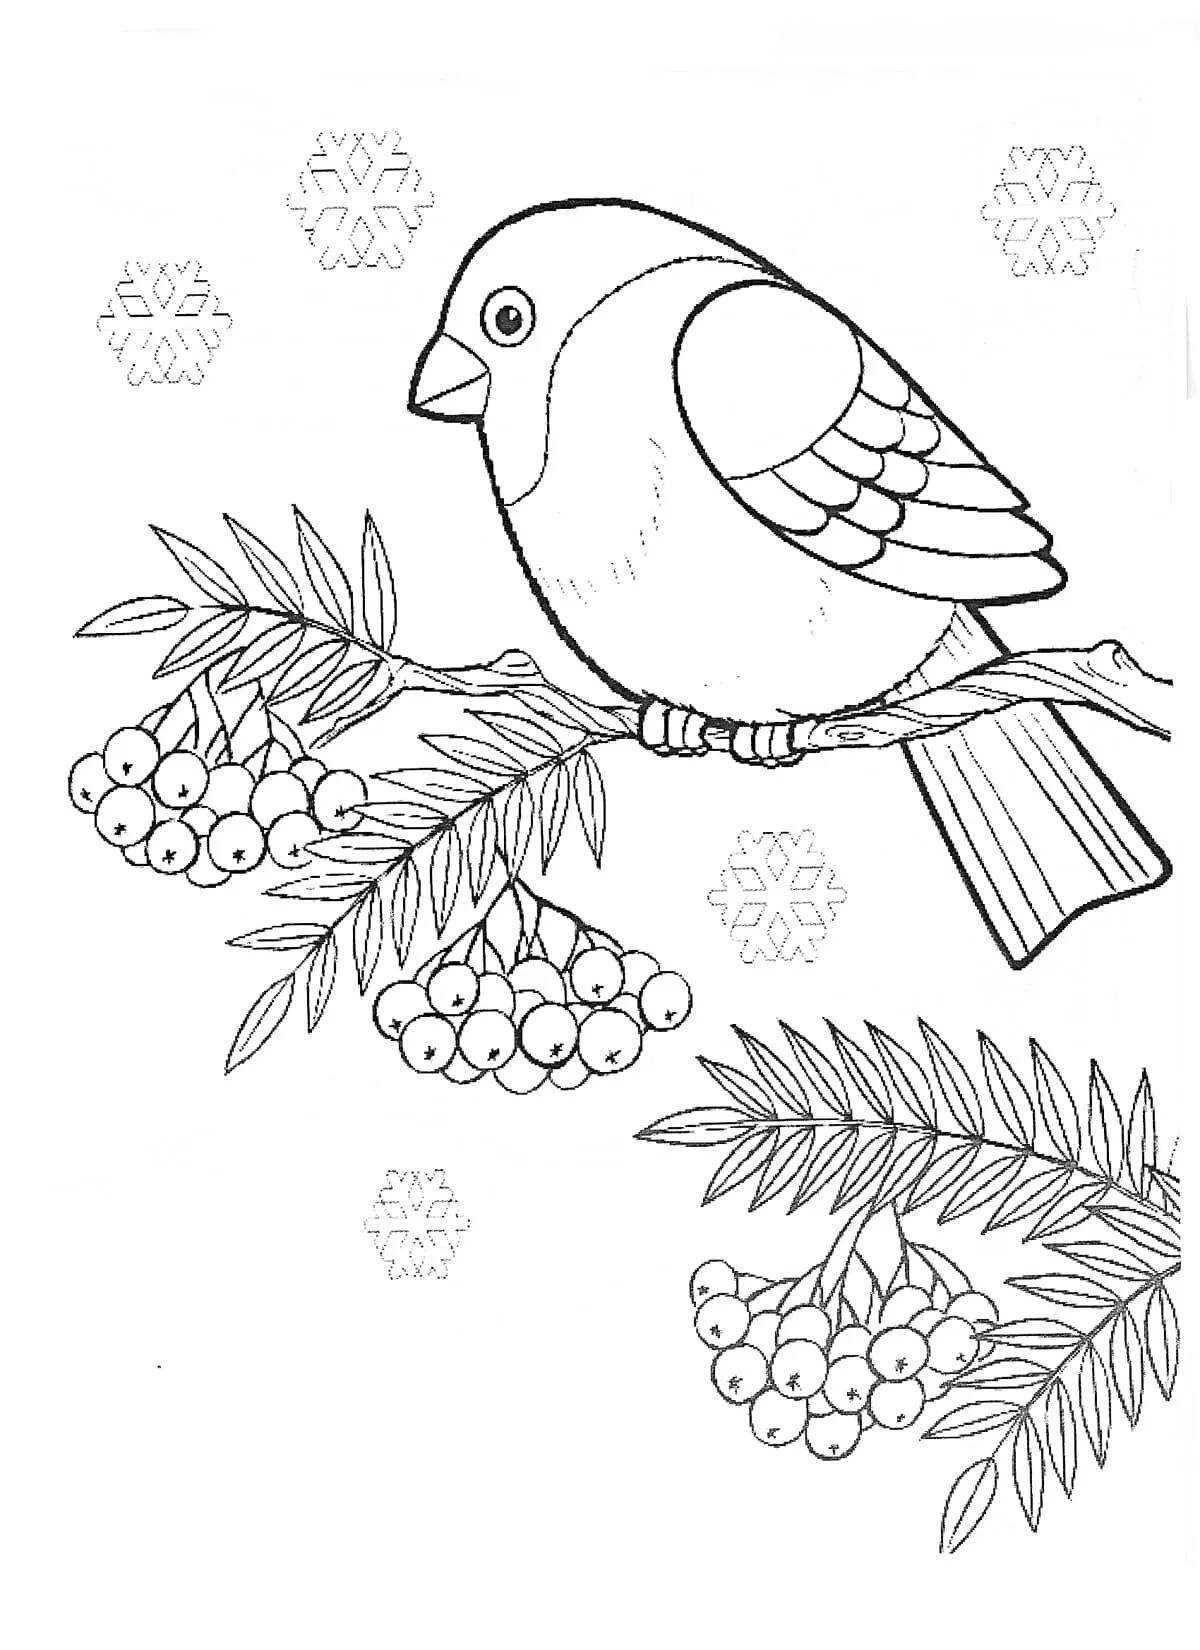 Magnificent winter birds coloring book for children 6-7 years old